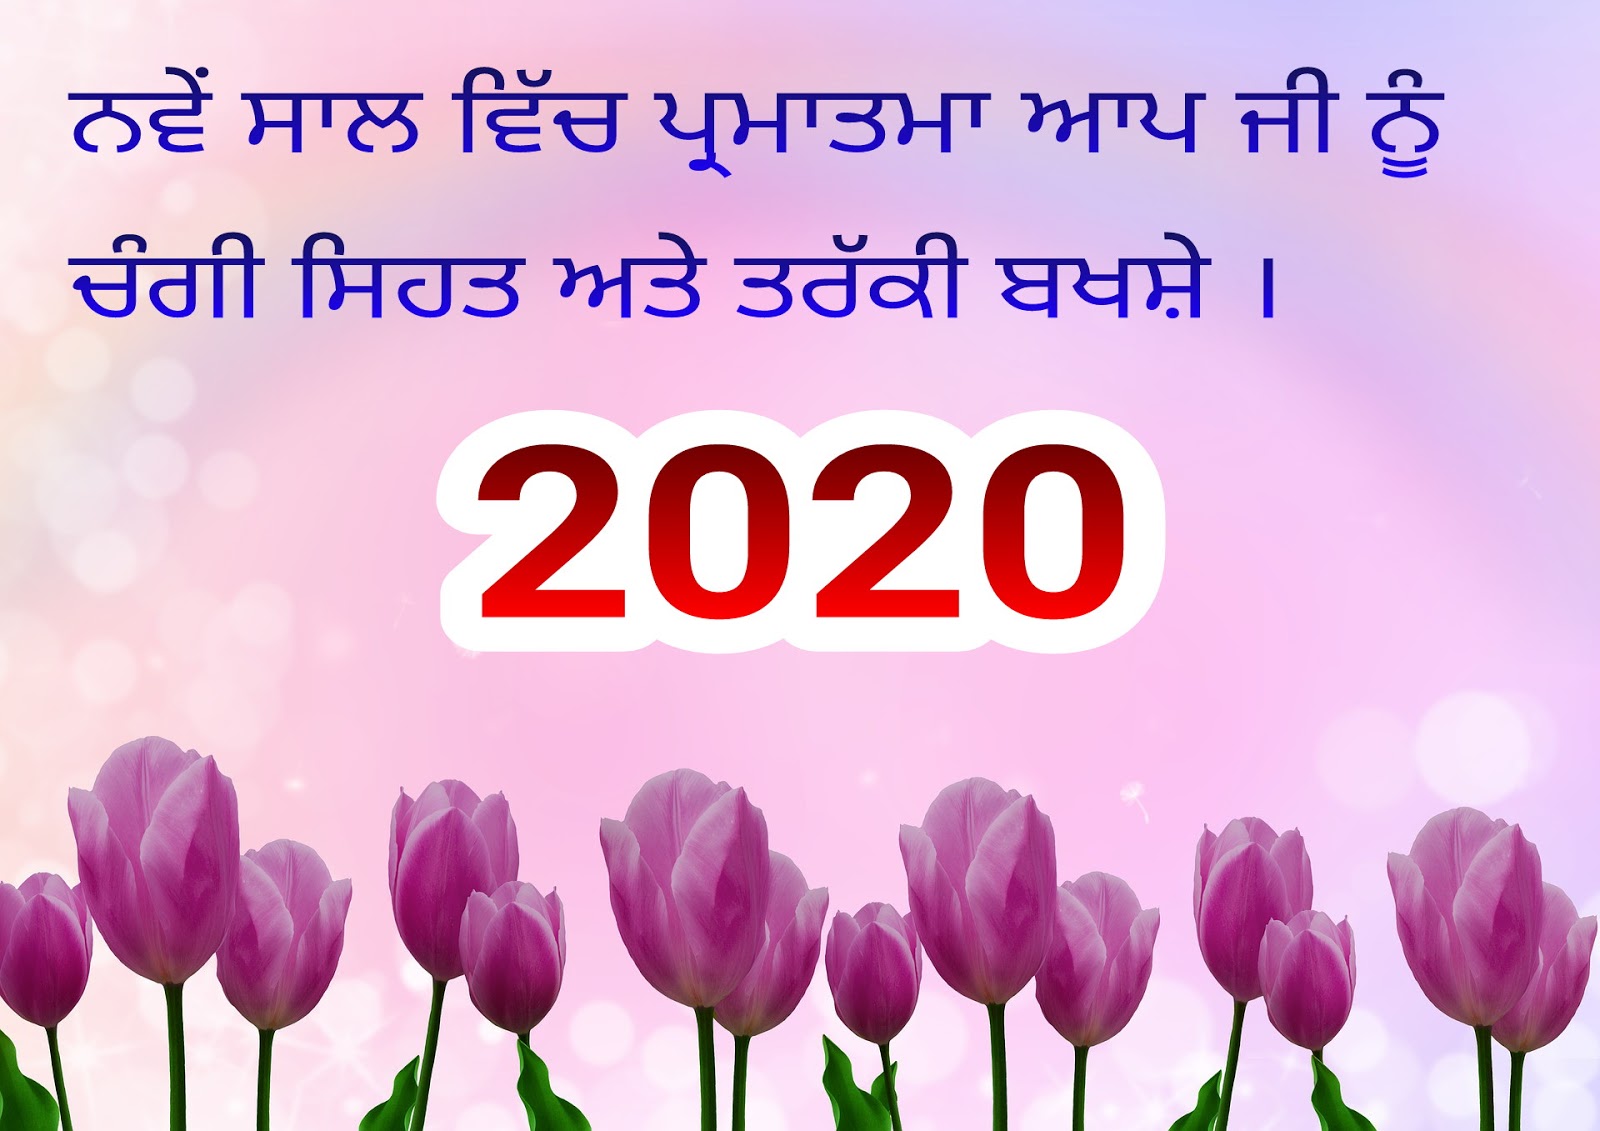 Punjabi New Year Wallpapers - Wishes For Success In Exams - HD Wallpaper 